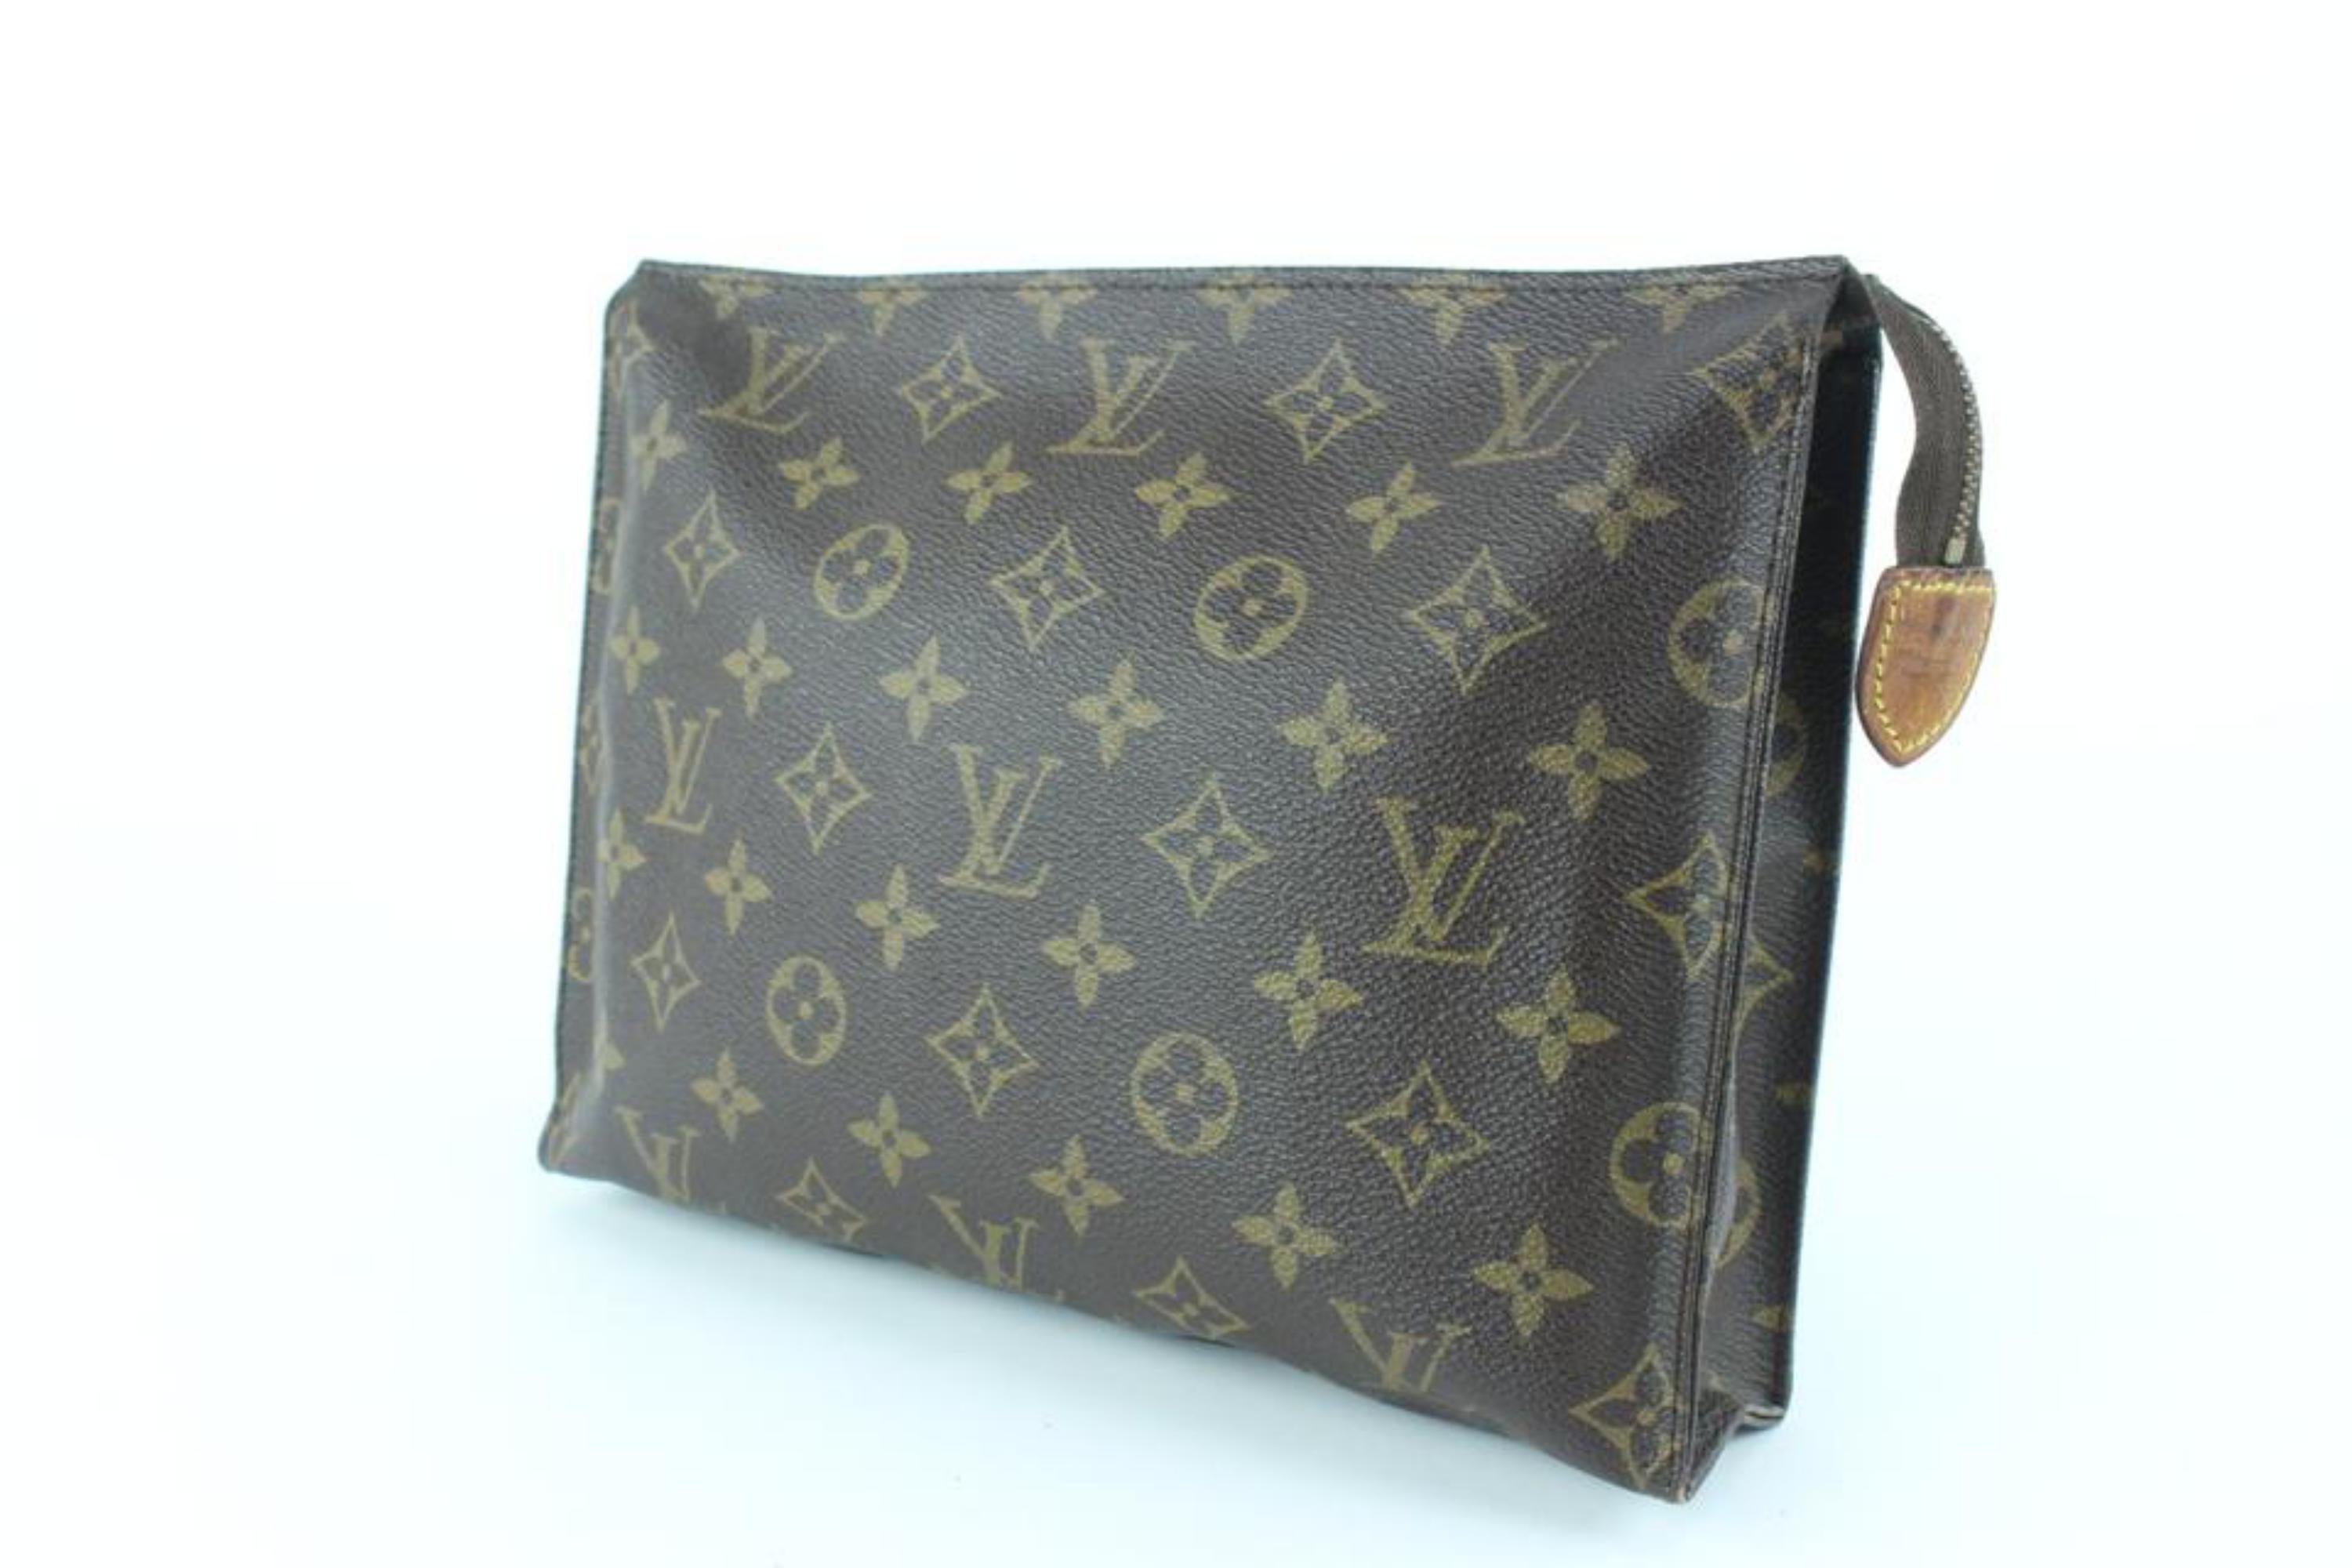 Louis Vuitton Discontinued Monogram Toiletry Pouch 26 Poche Toilette 112lv39
Date Code/Serial Number: 871 TH
Made In: France
Measurements: Length:  9.75